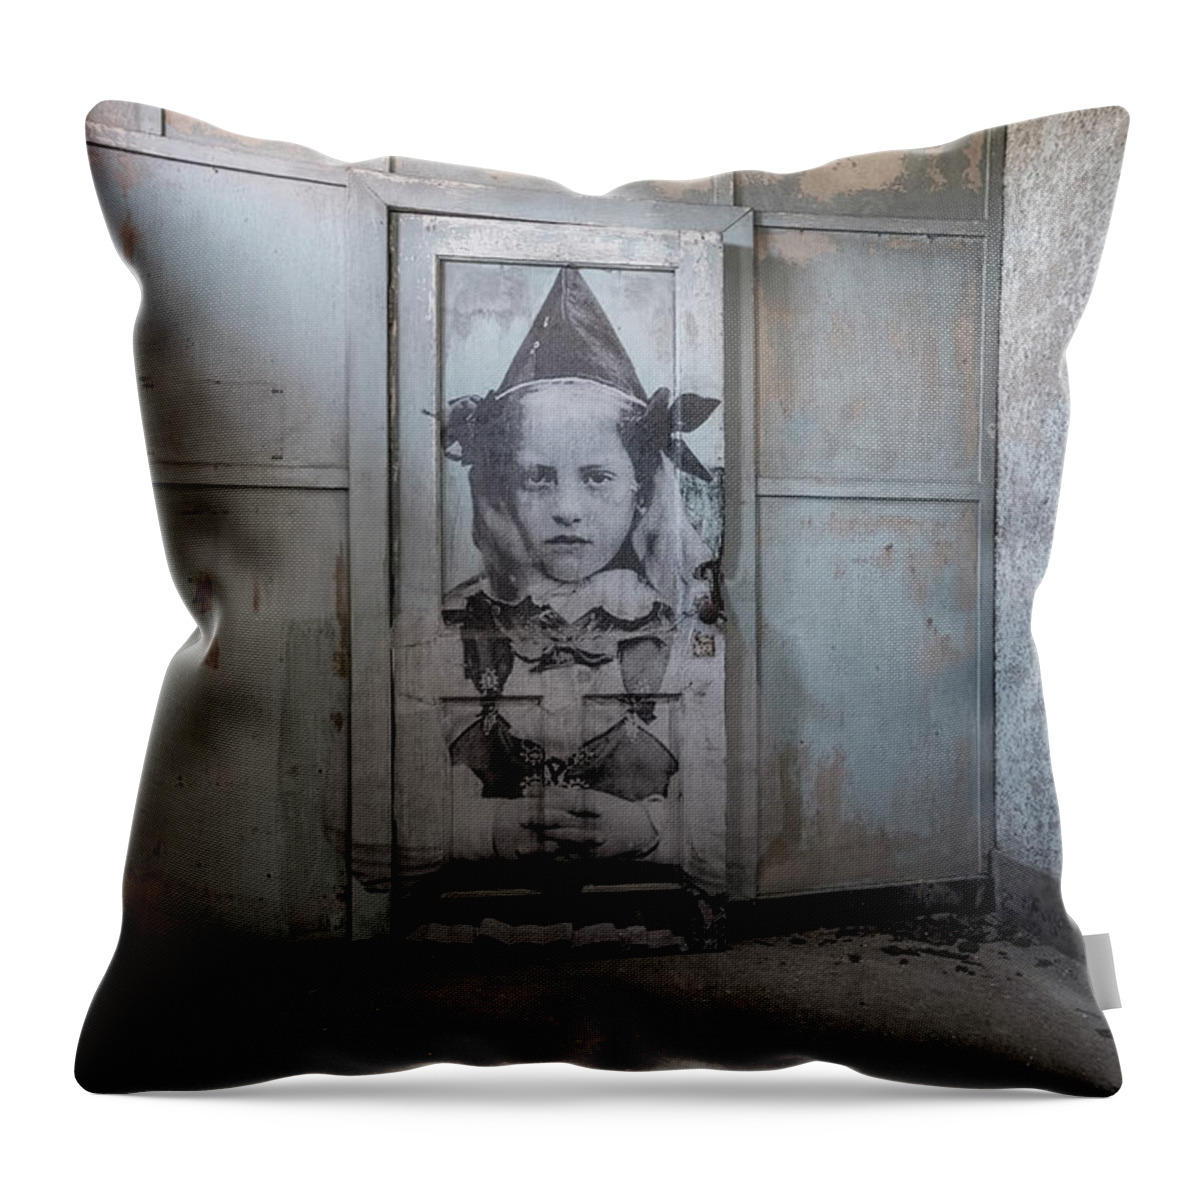 Jersey City New Jersey Throw Pillow featuring the photograph JR On The Door by Tom Singleton